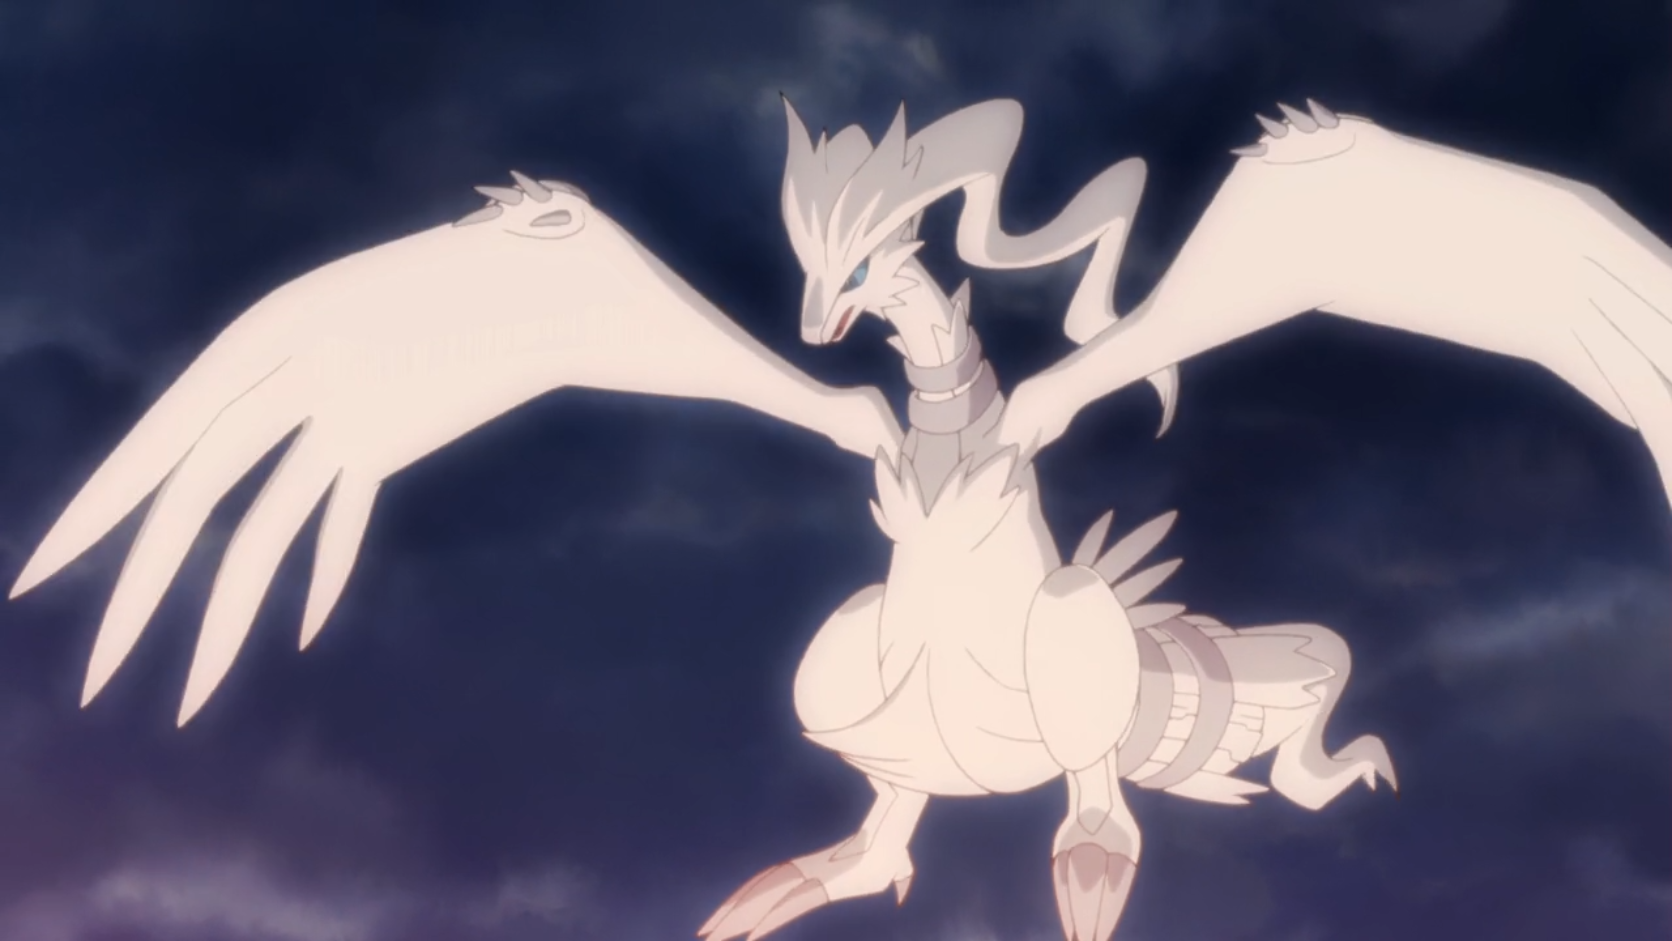 Reshiram, the flames of truth